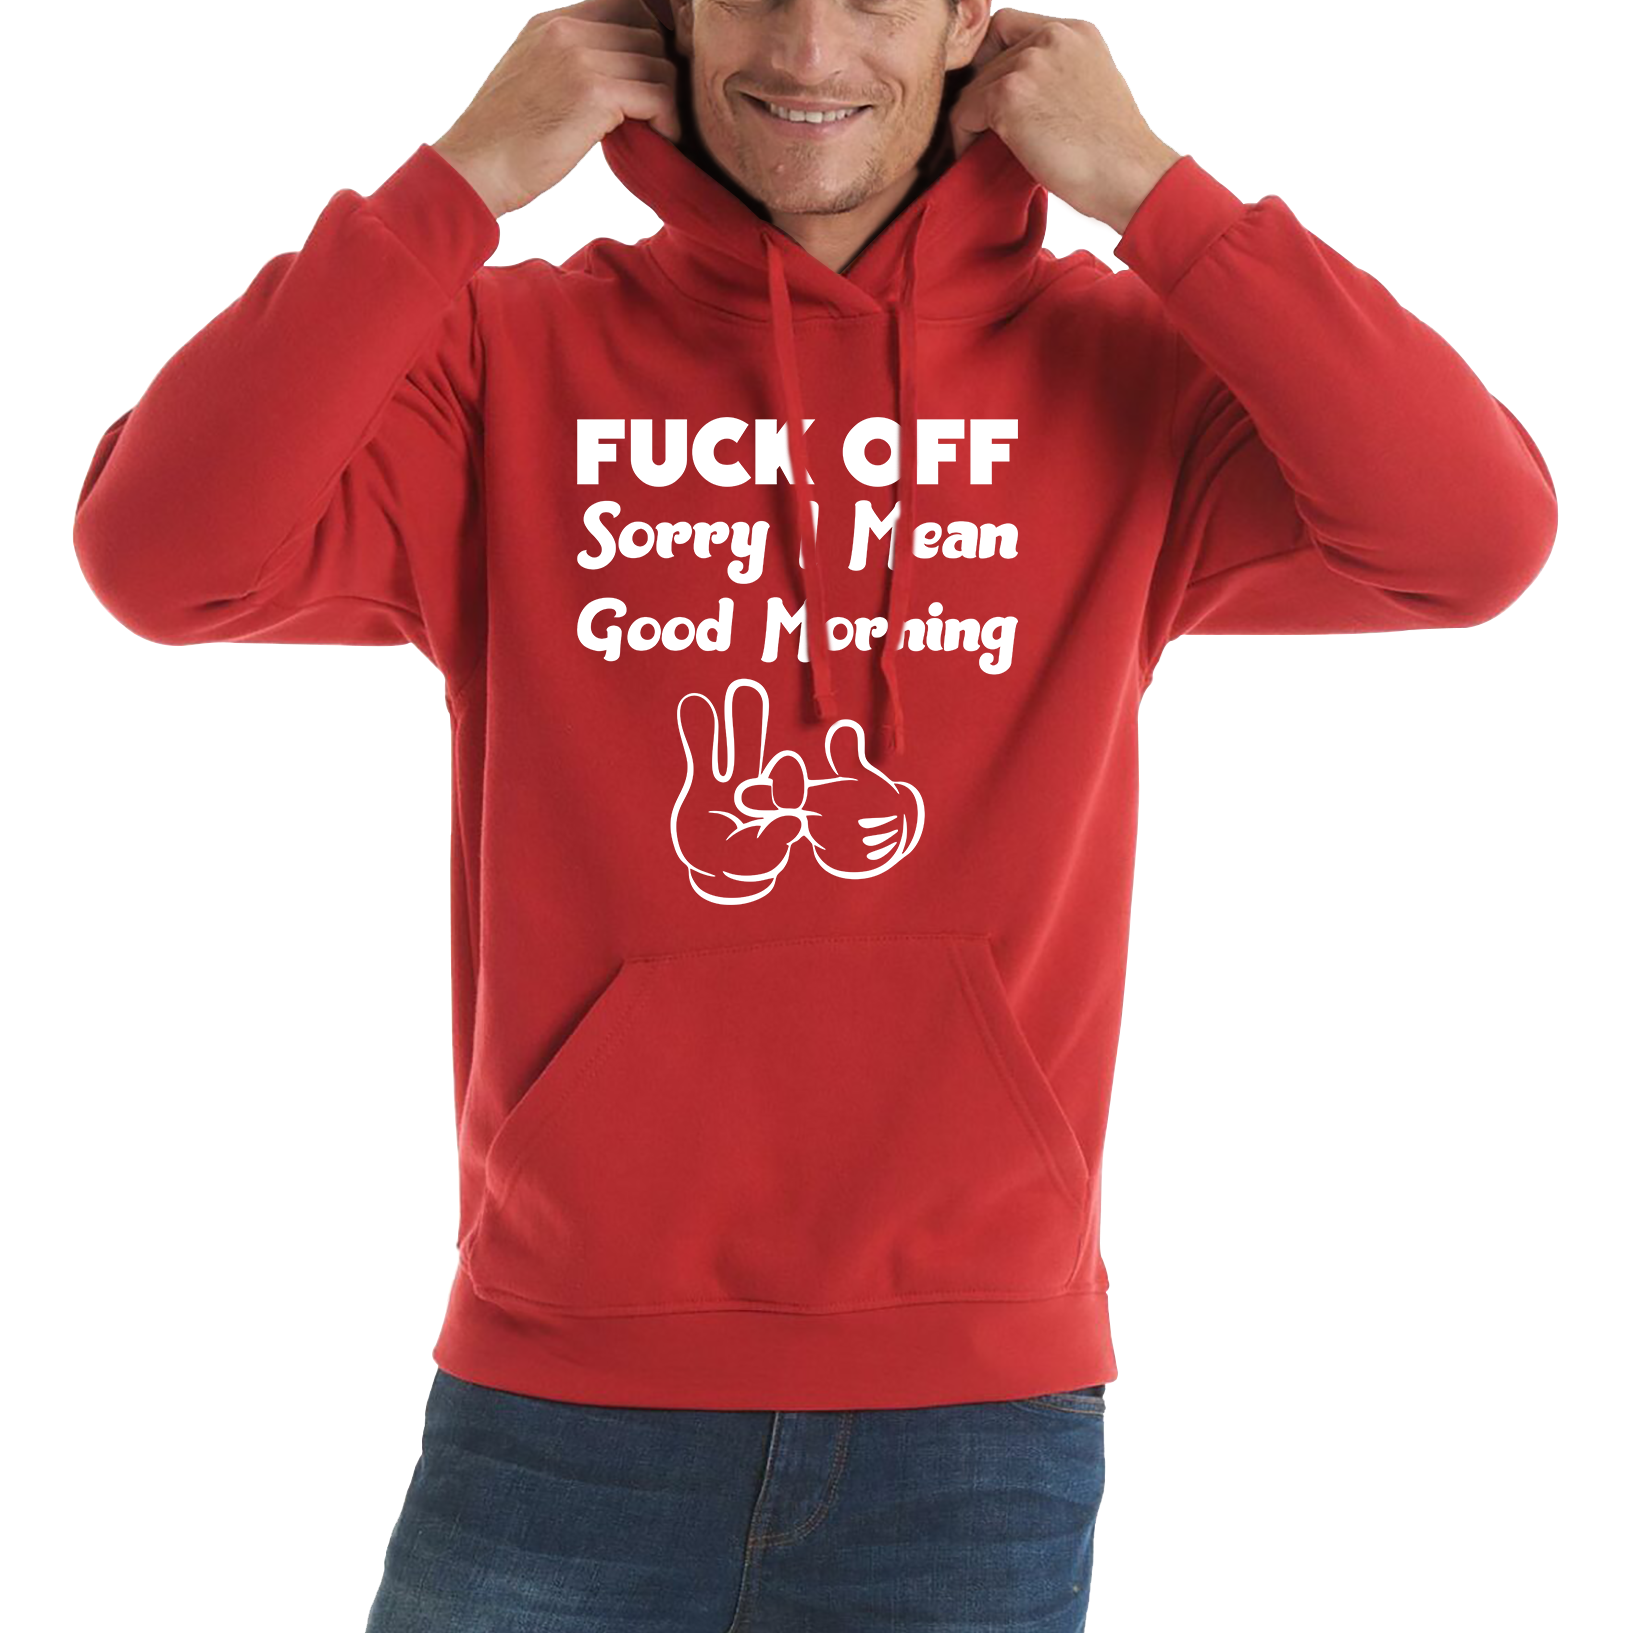 Fuck Off Sorry I Mean Good Morning Funny Offensive Novelty Sarcastic Humour Unisex Hoodie